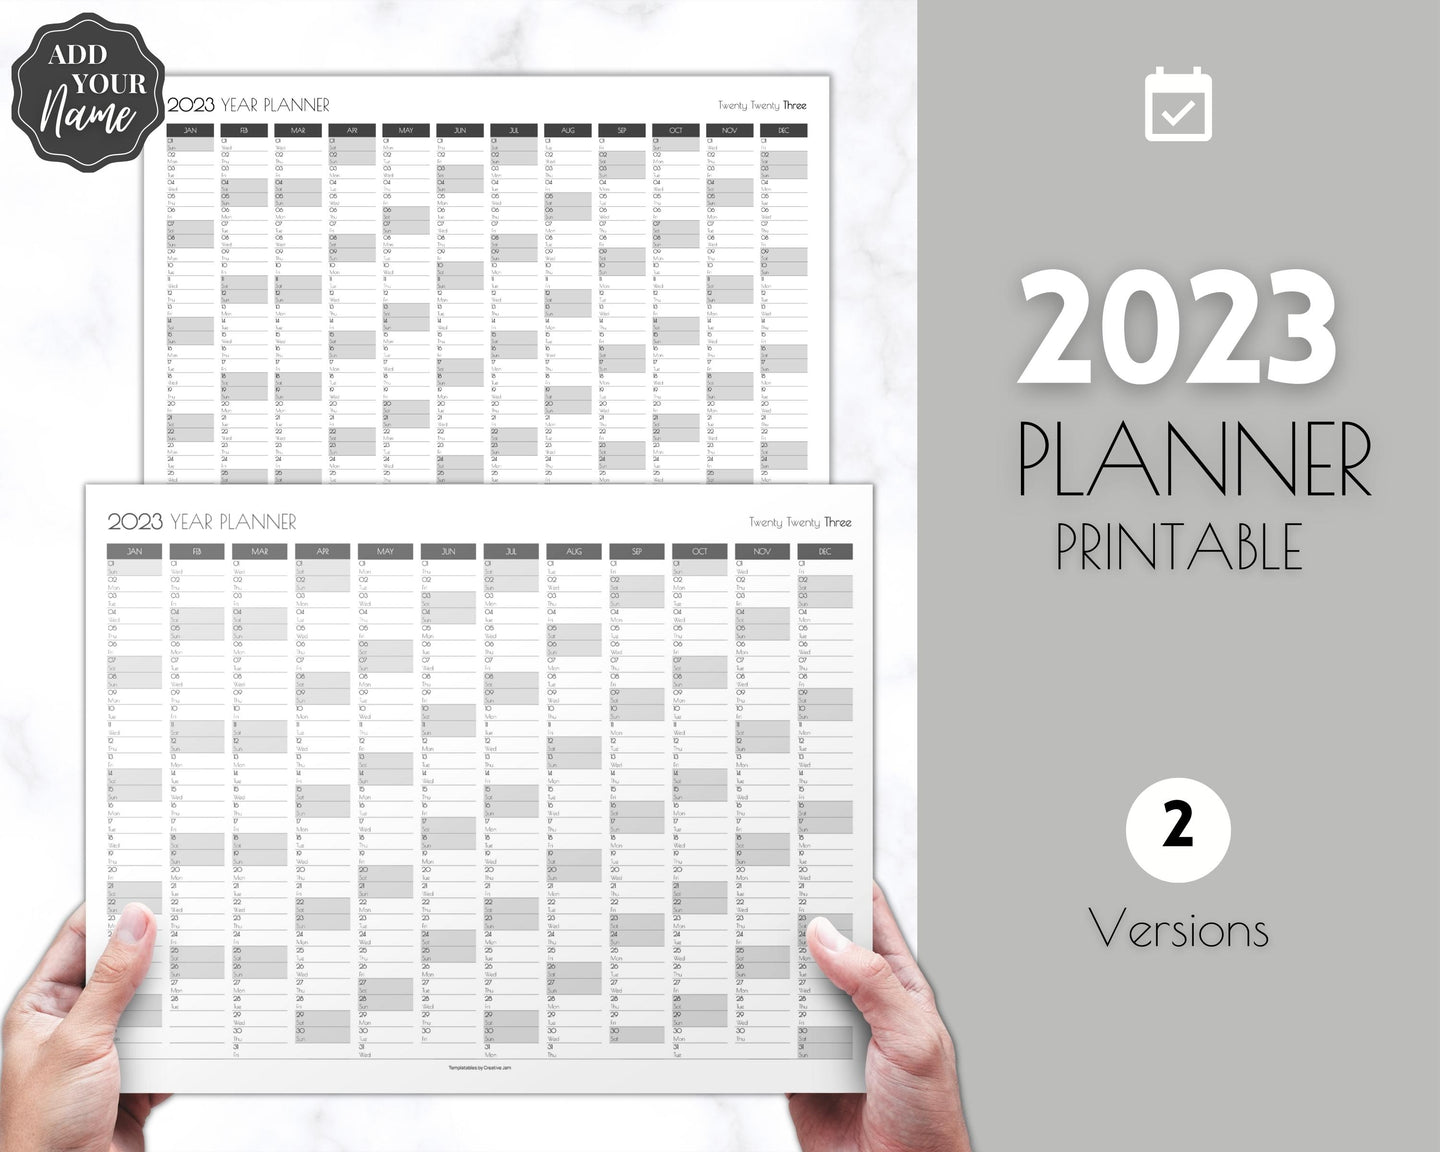 2023 Wall Calendar Printable | Large 12 Month Personalized Calendar, Annual Year at a glance | Art Deco